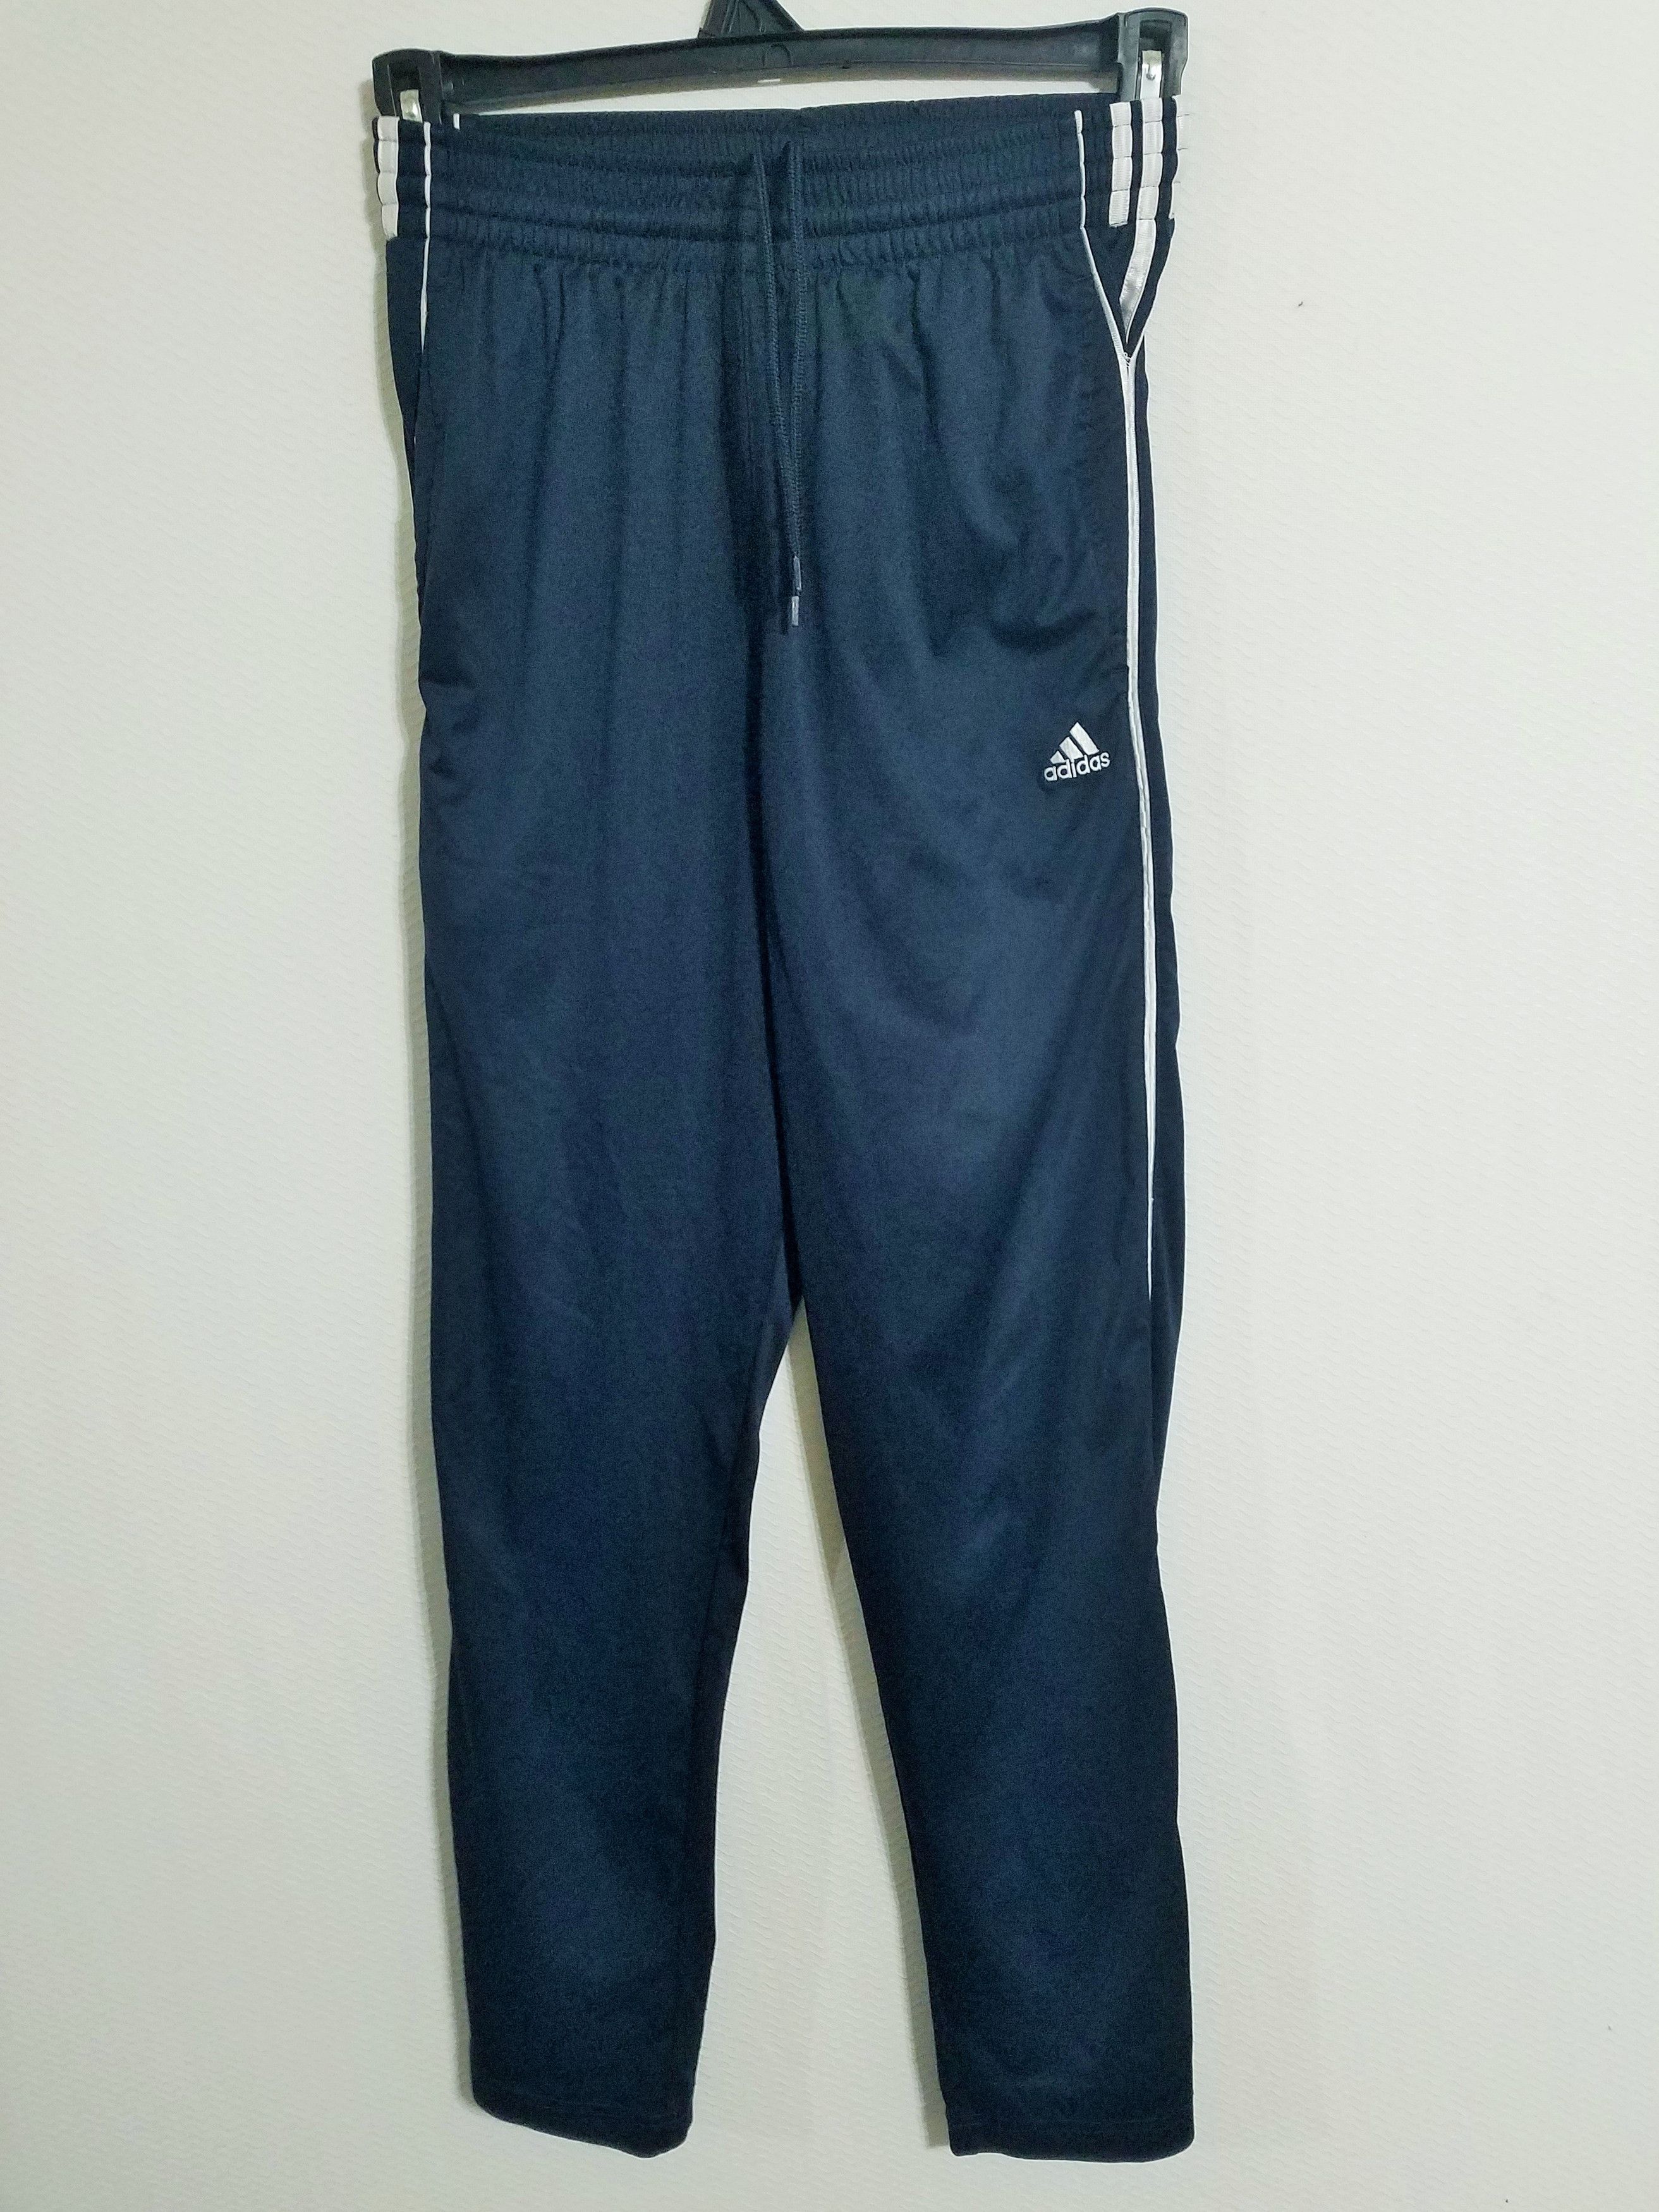 Adidas Adidas Men's Small Navy Blue Athletic Pants Joggers Track Size US 30 / EU 46 - 1 Preview